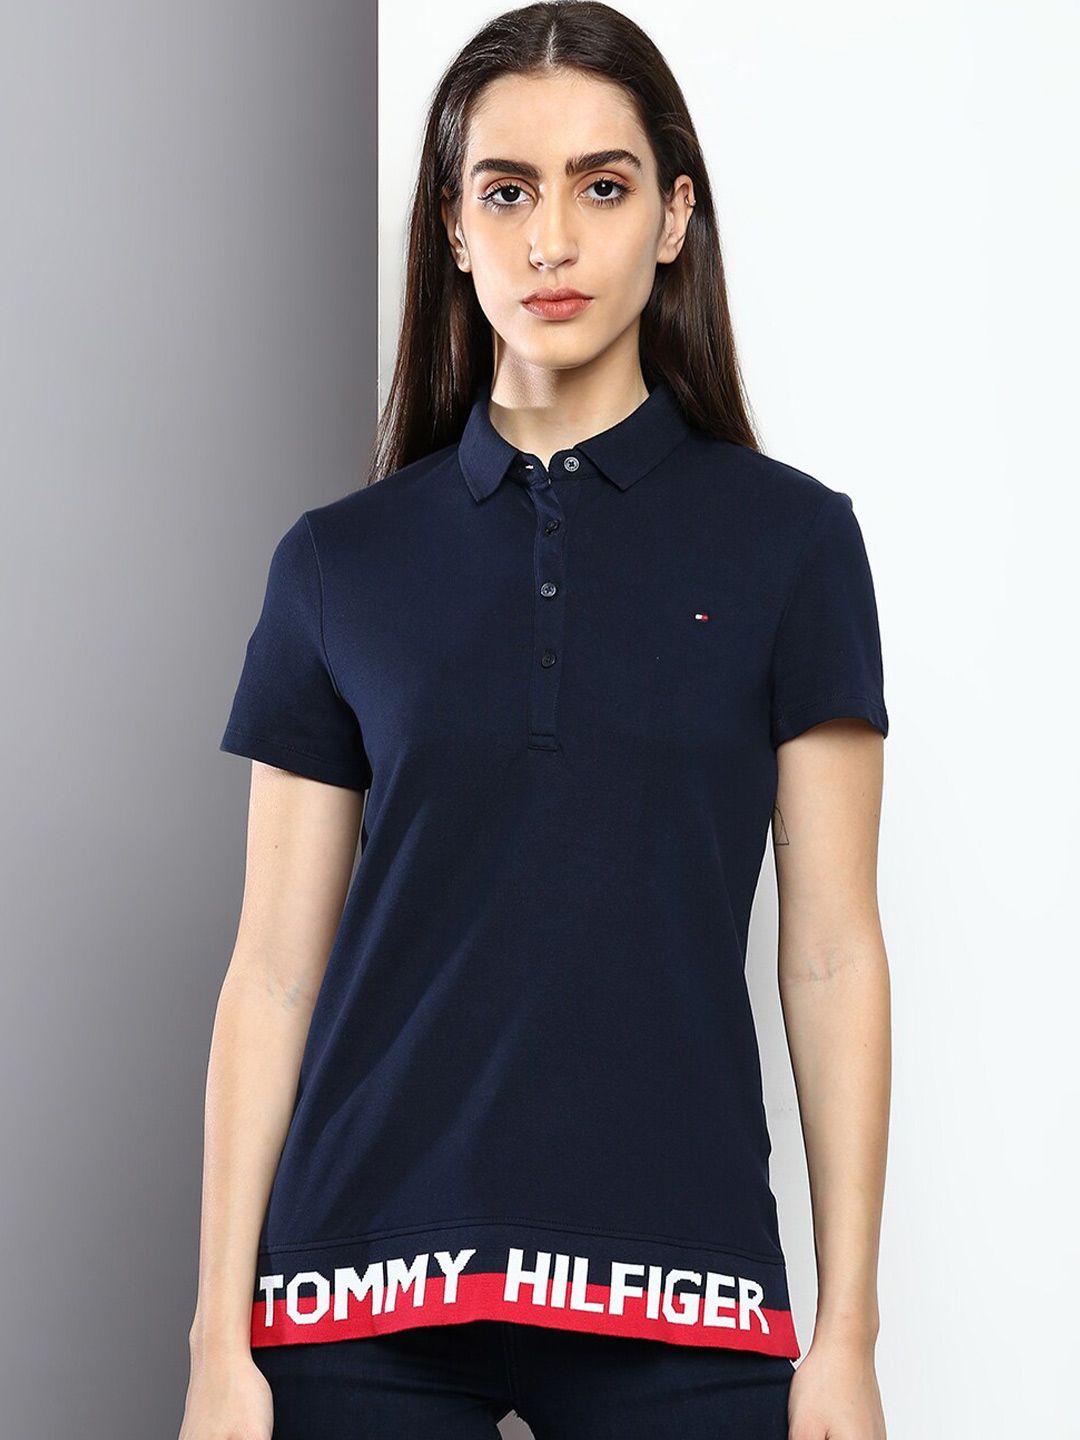 Tommy Hilfiger Women Navy Blue & White Typography Printed Polo Collar T-shirt